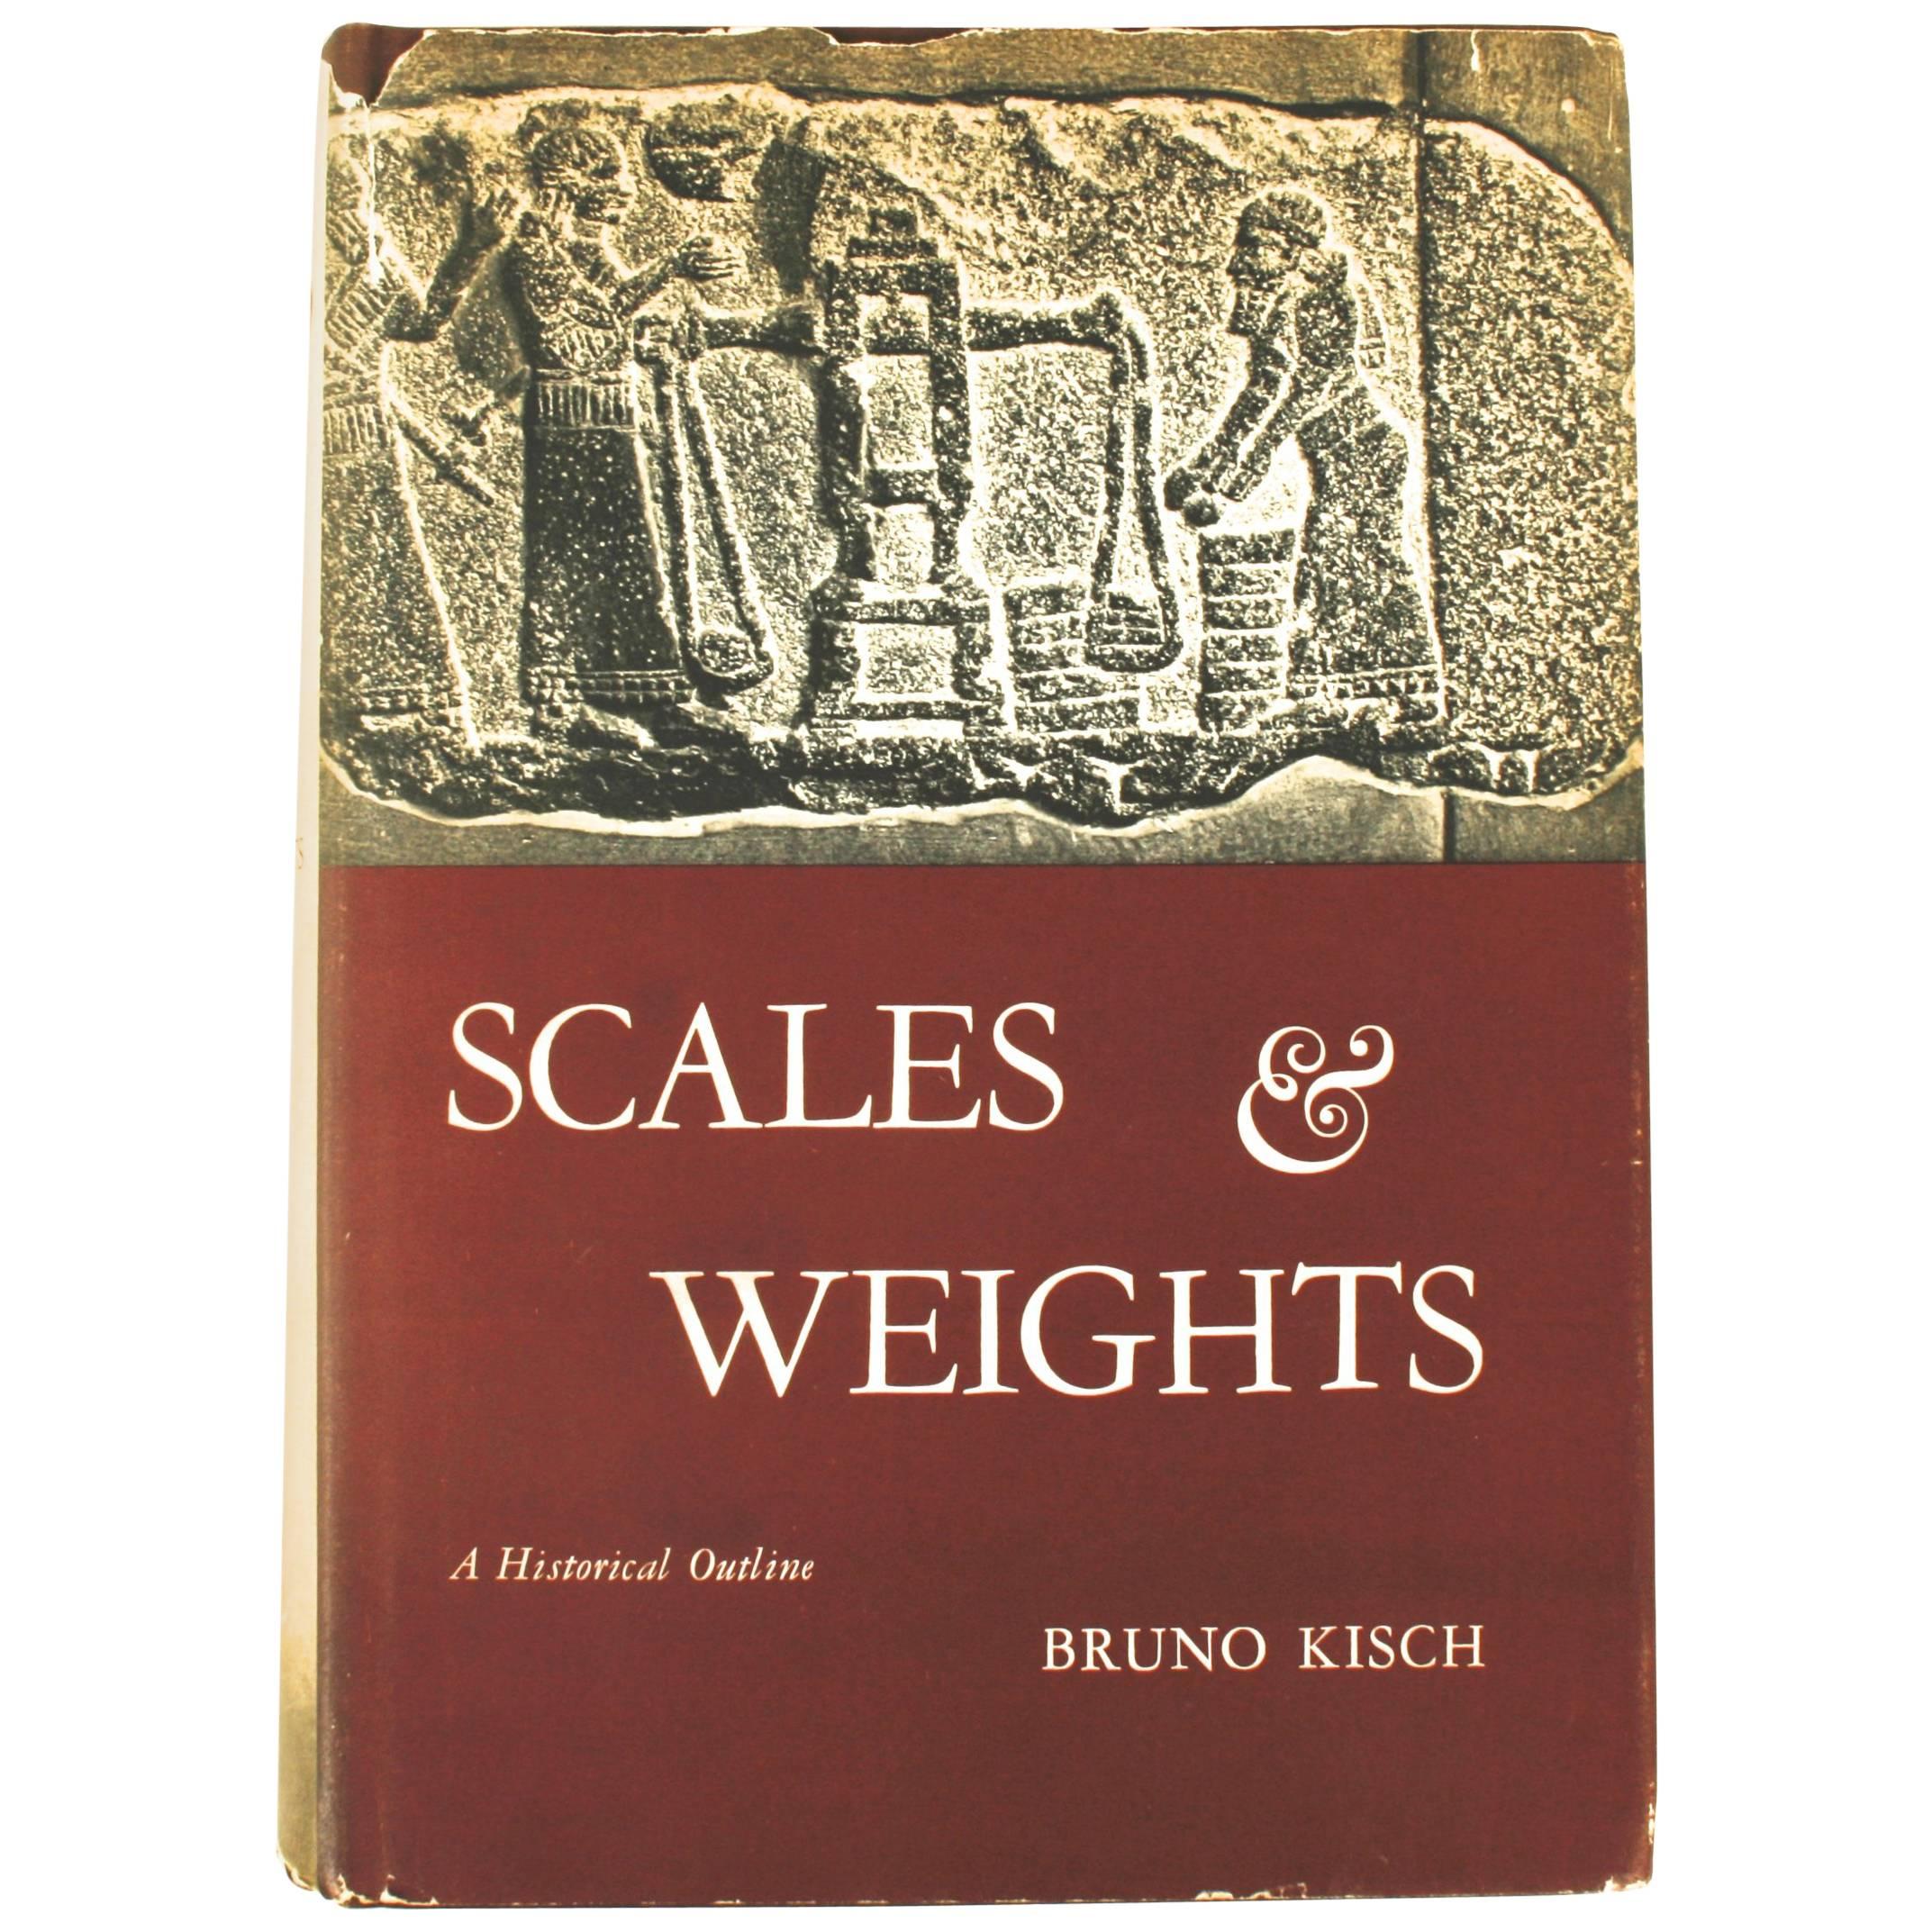 Scales & Weights, First Edition, Signed